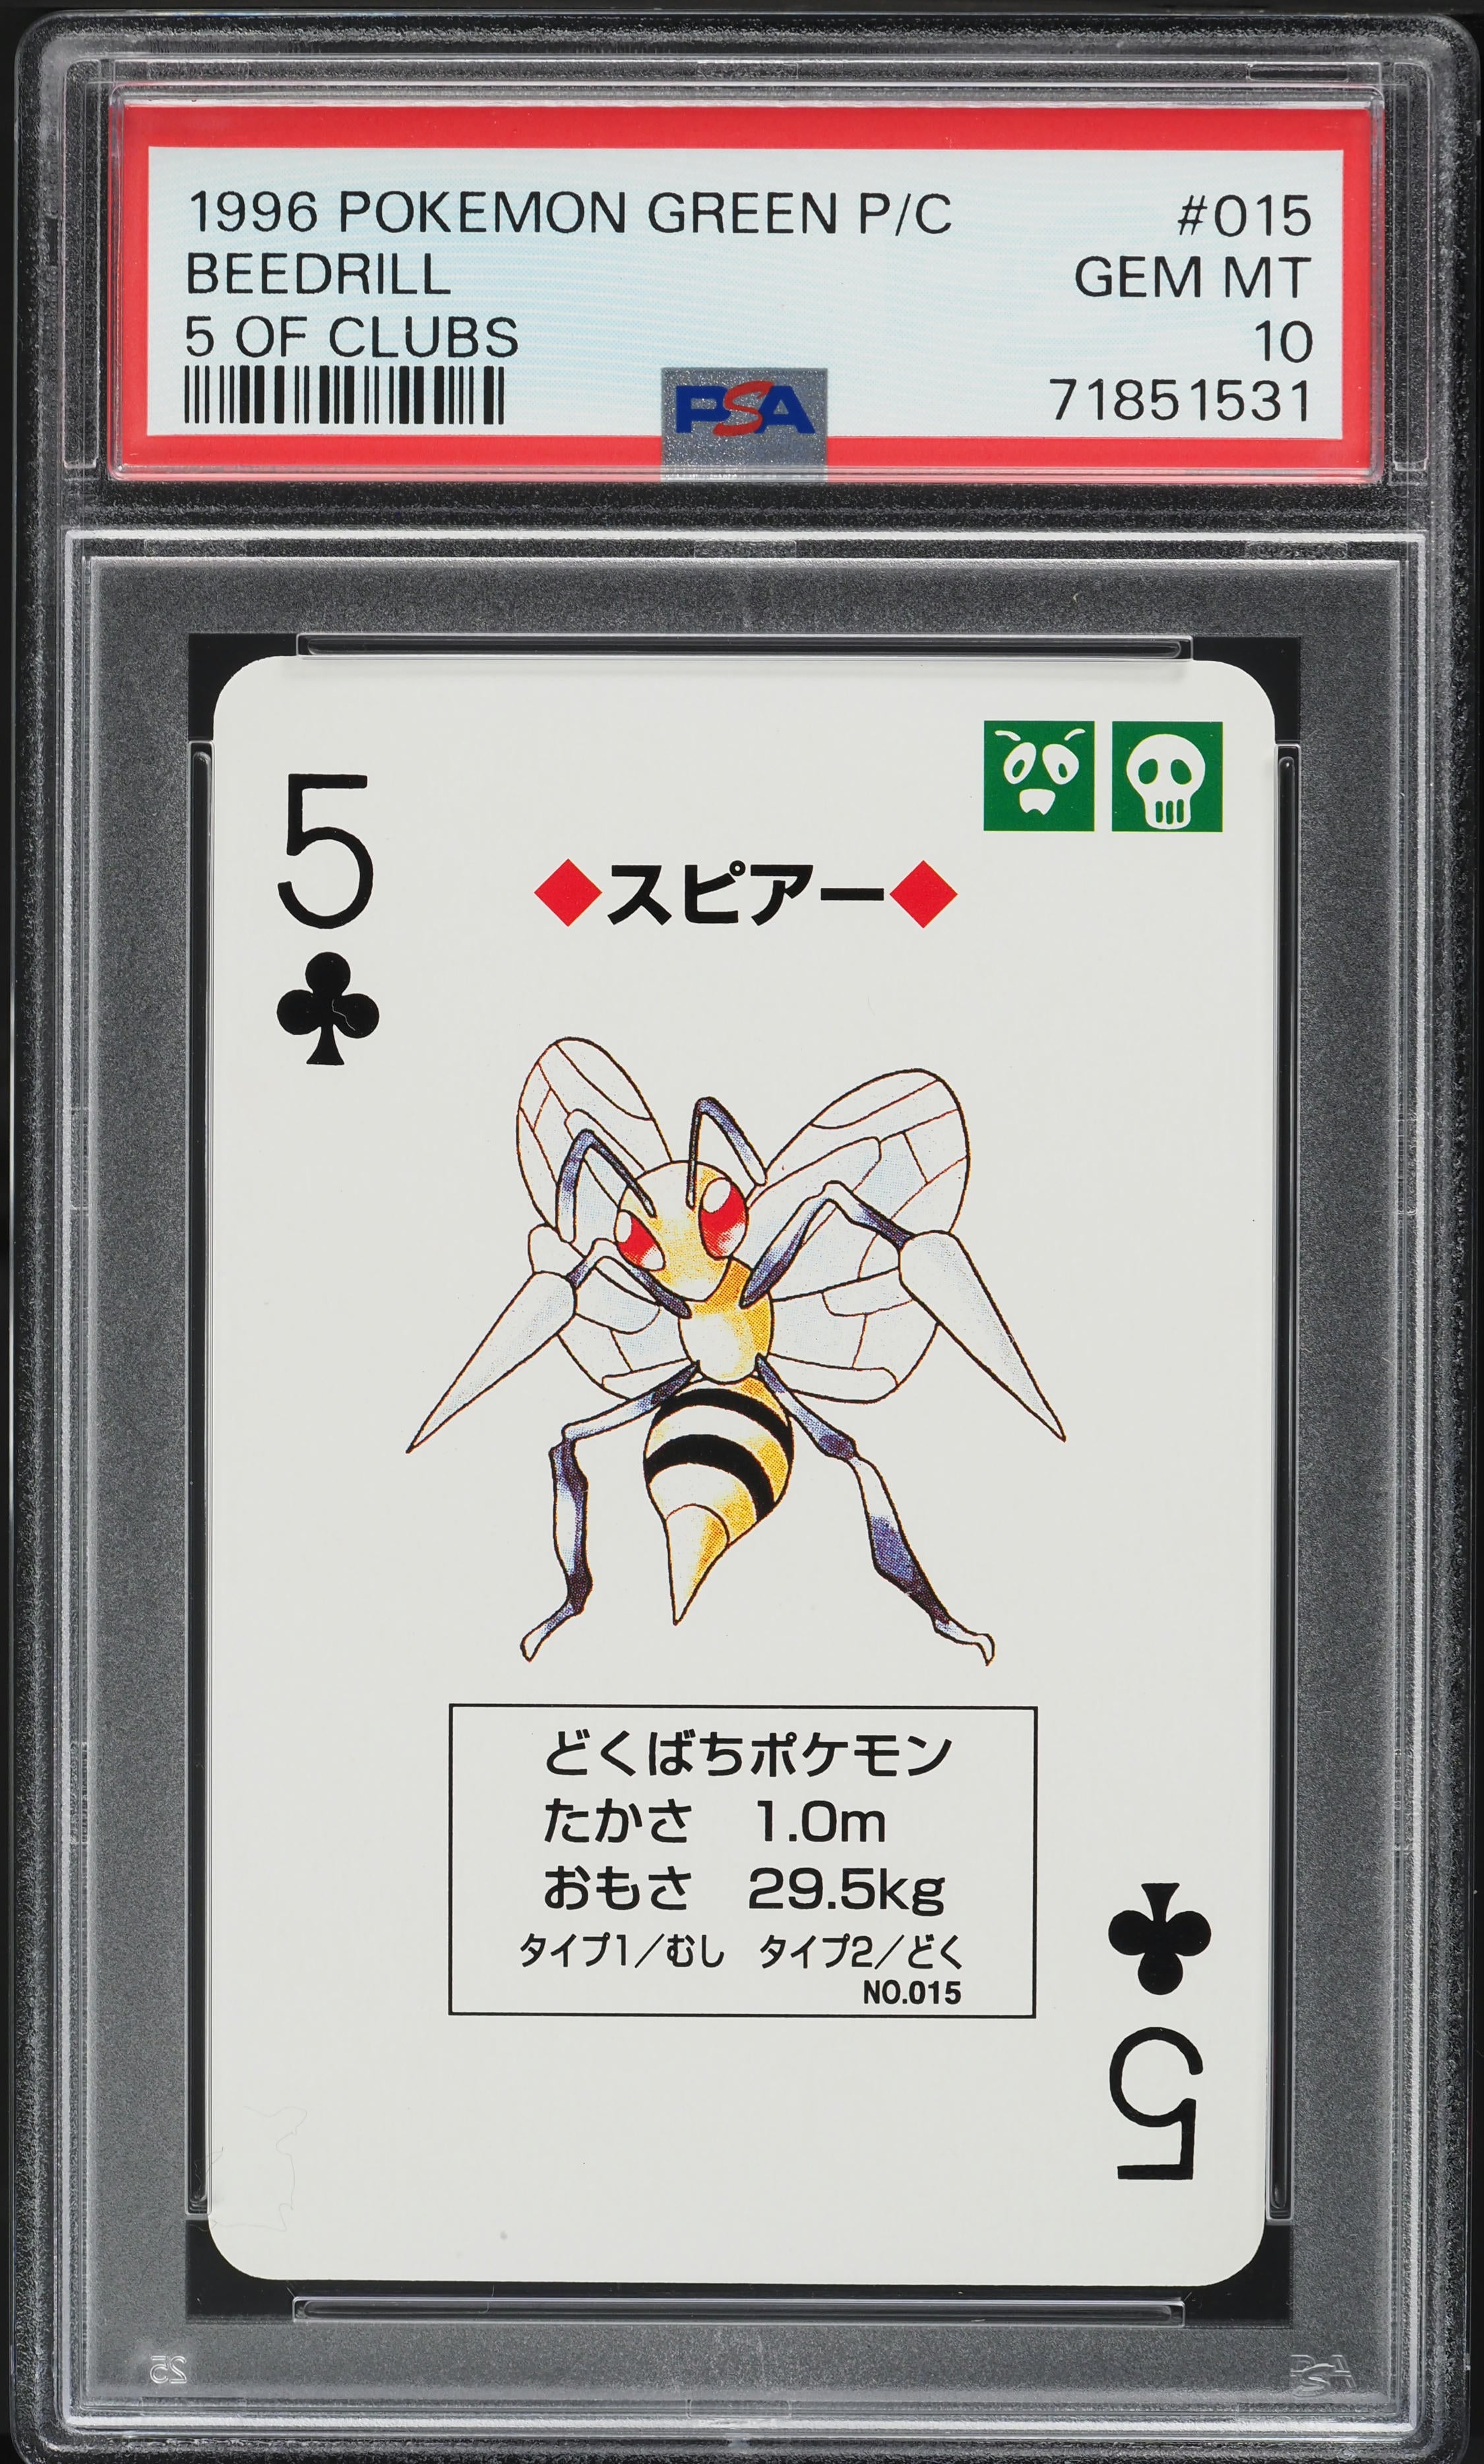 1996 Pokemon Green Version Playing Cards 5 Of Clubs Beedrill #015 PSA 10 GEM